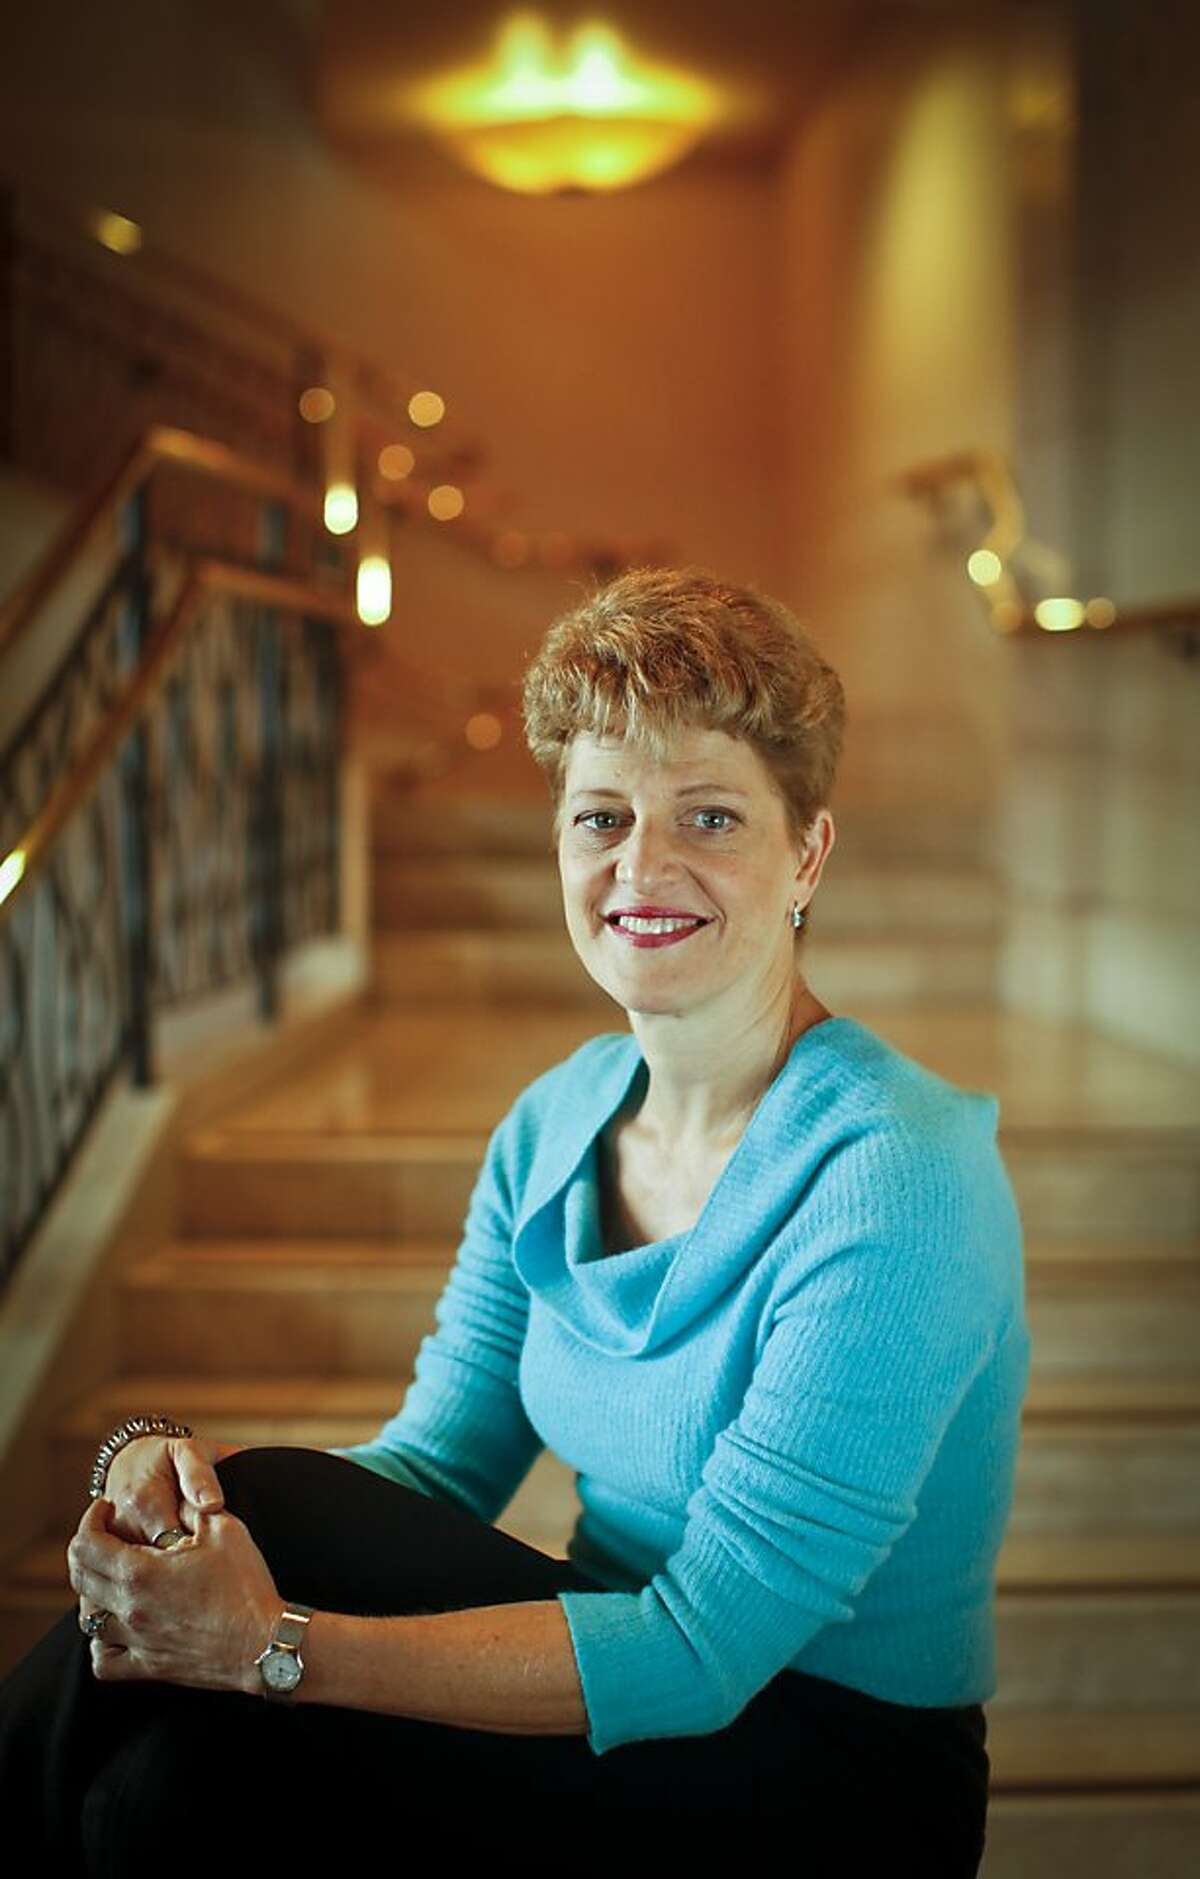 ACT artistic director Carey Perloff is seen on Wednesday, Oct. 10, 2012 at the Geary Theater in San Francisco, Calif.